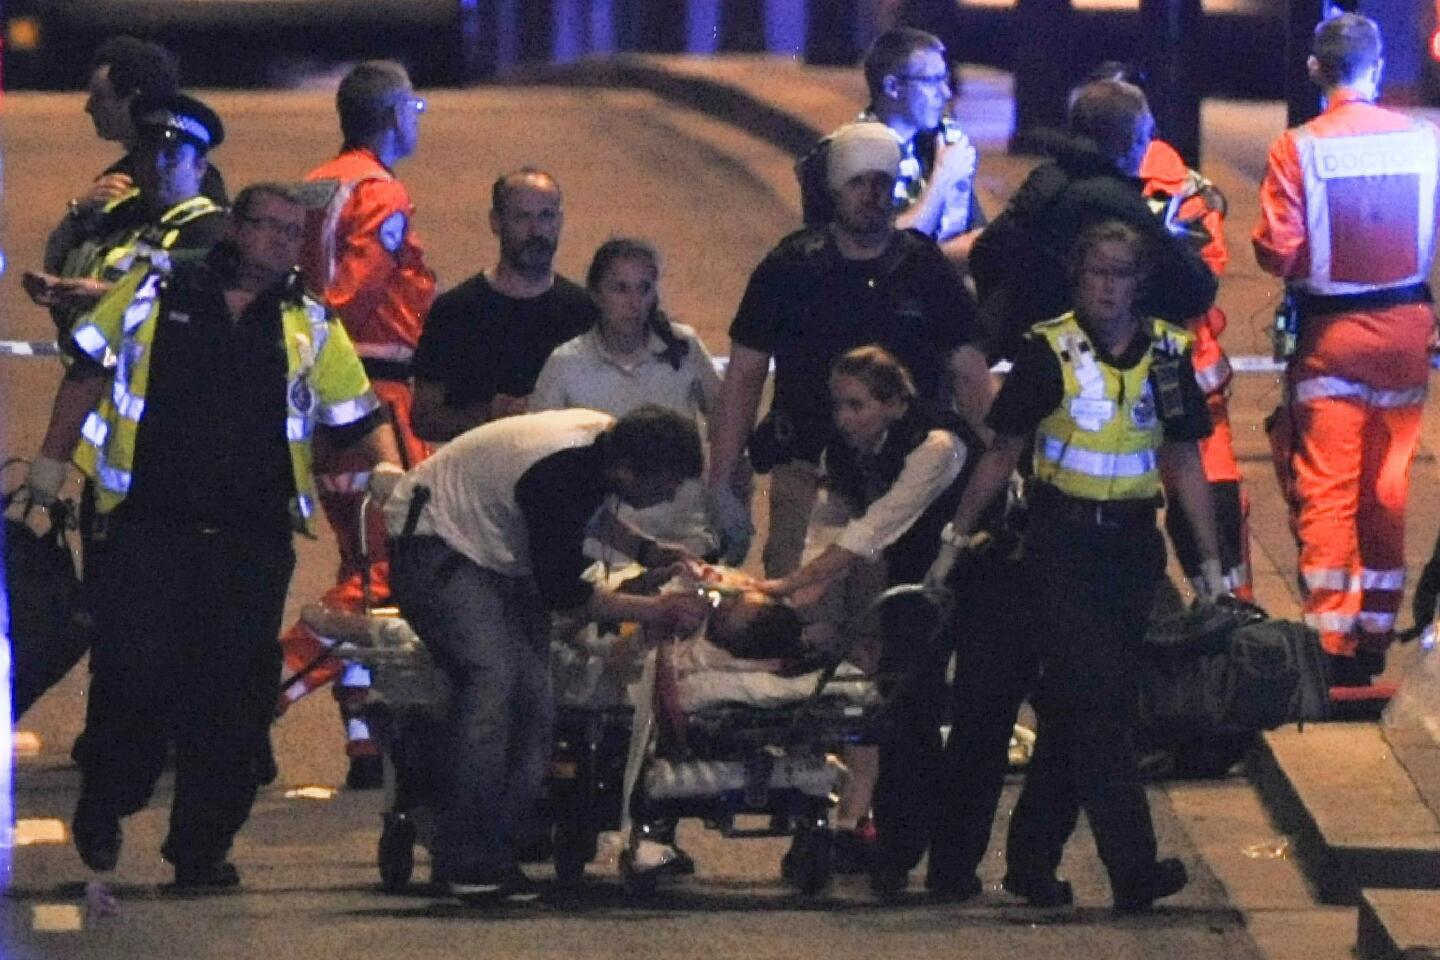 Police and emergency crews attend to victims of a terror attack on London Bridge.